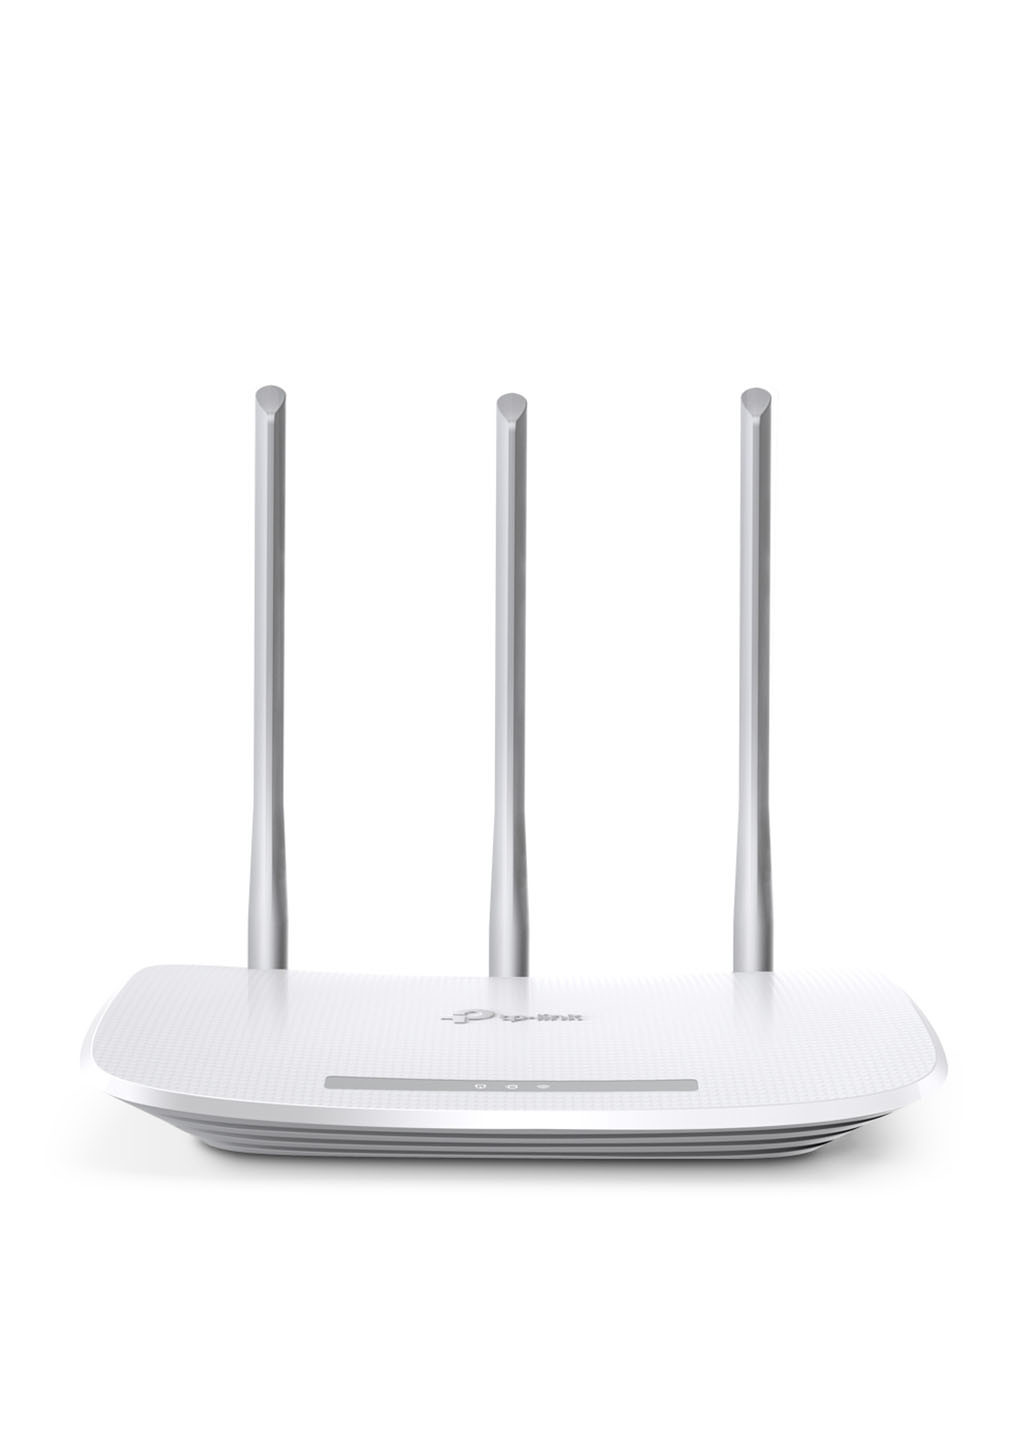 Маршрутизатор TL-WR845N TP-Link маршрутизатор tp-link tl-wr845n (130280715)